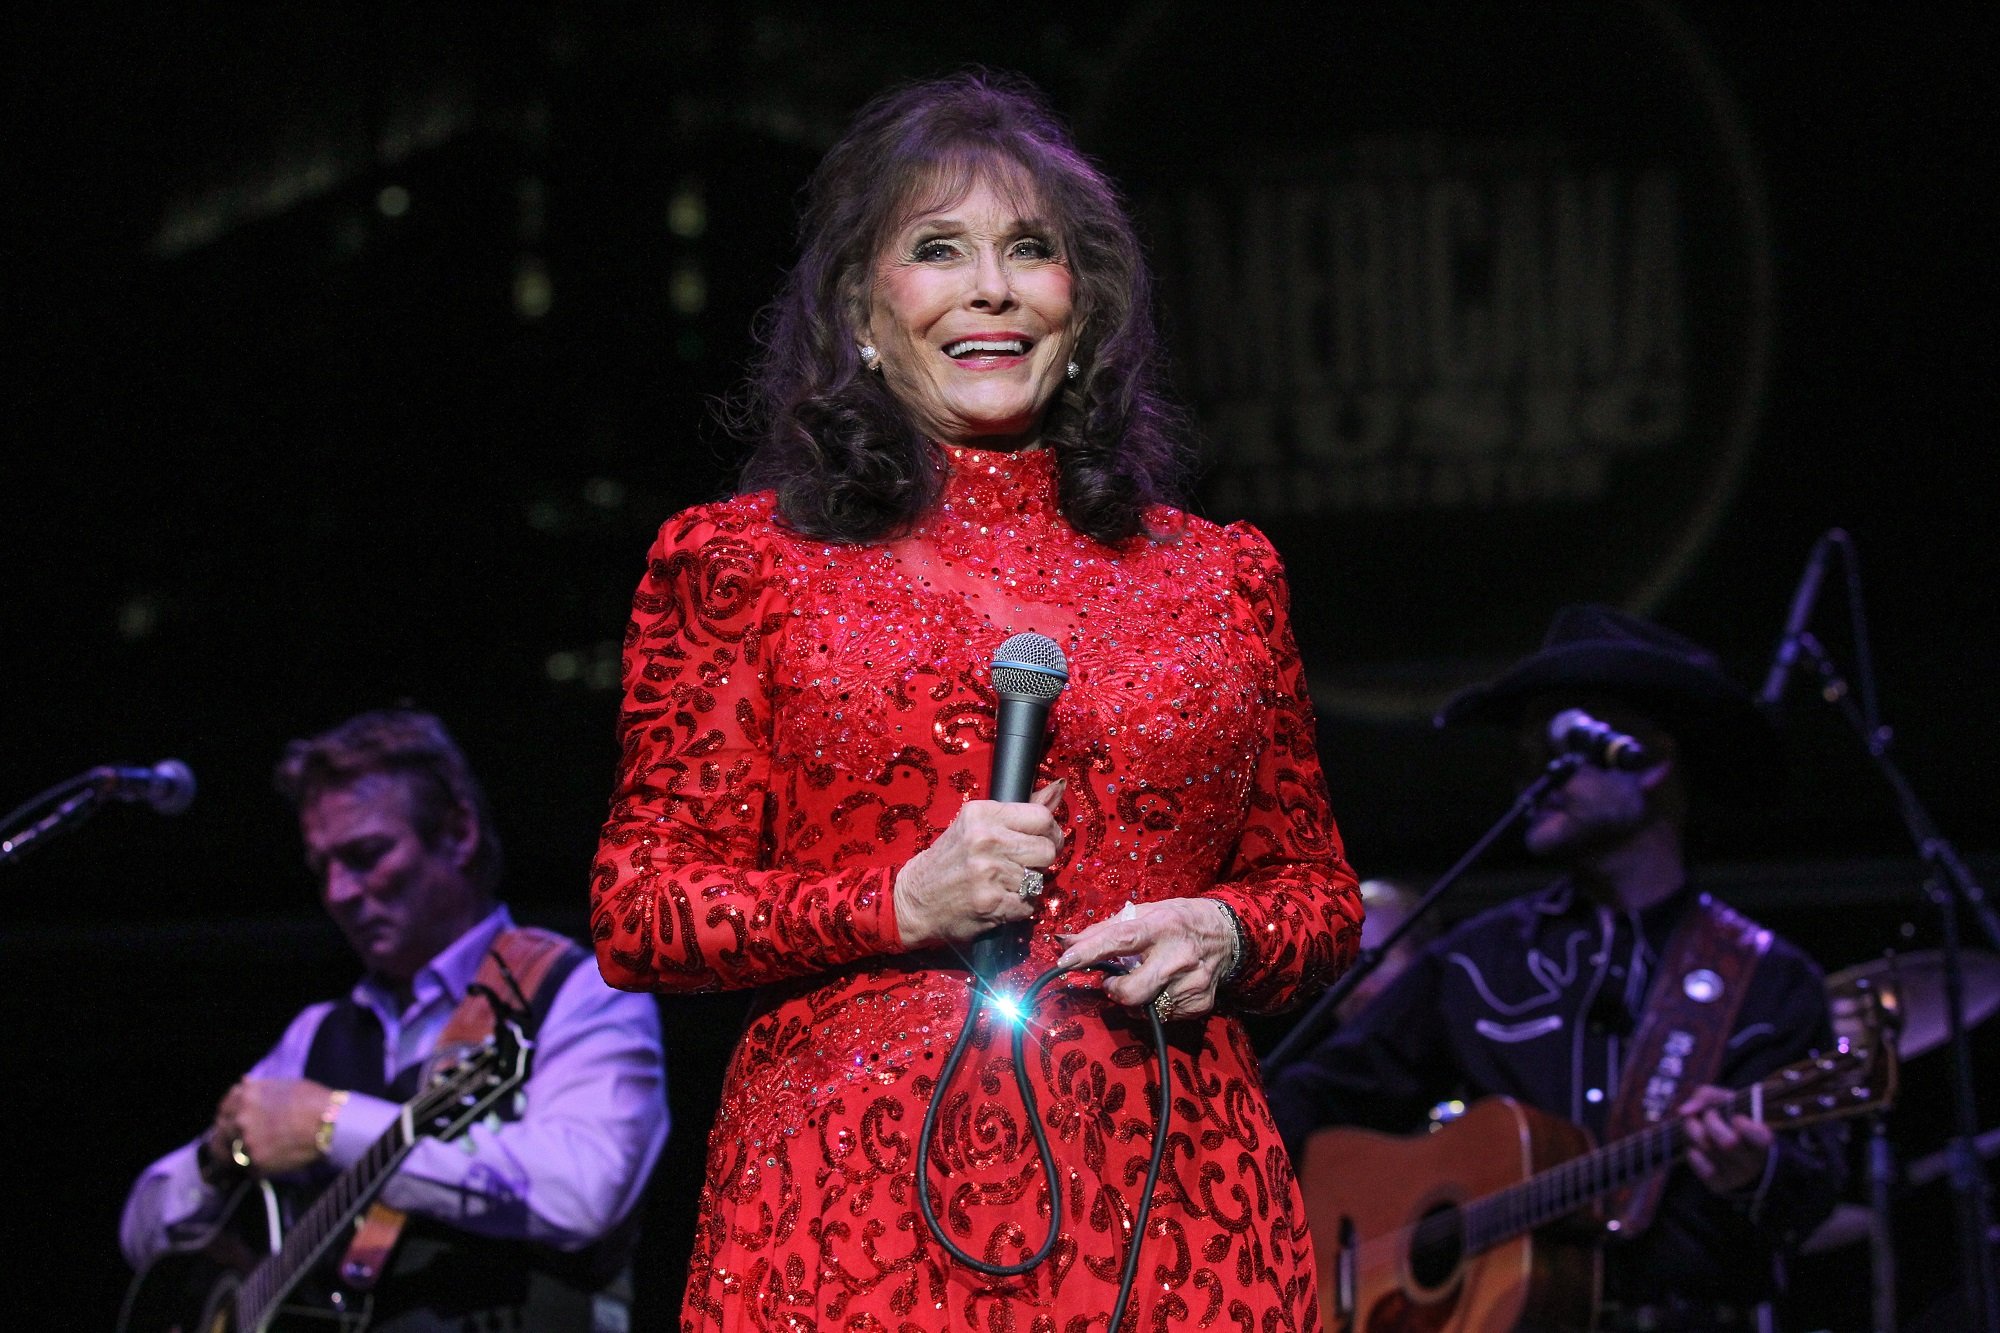 Loretta Lynn smiles in a bright red gown while holding a microphone